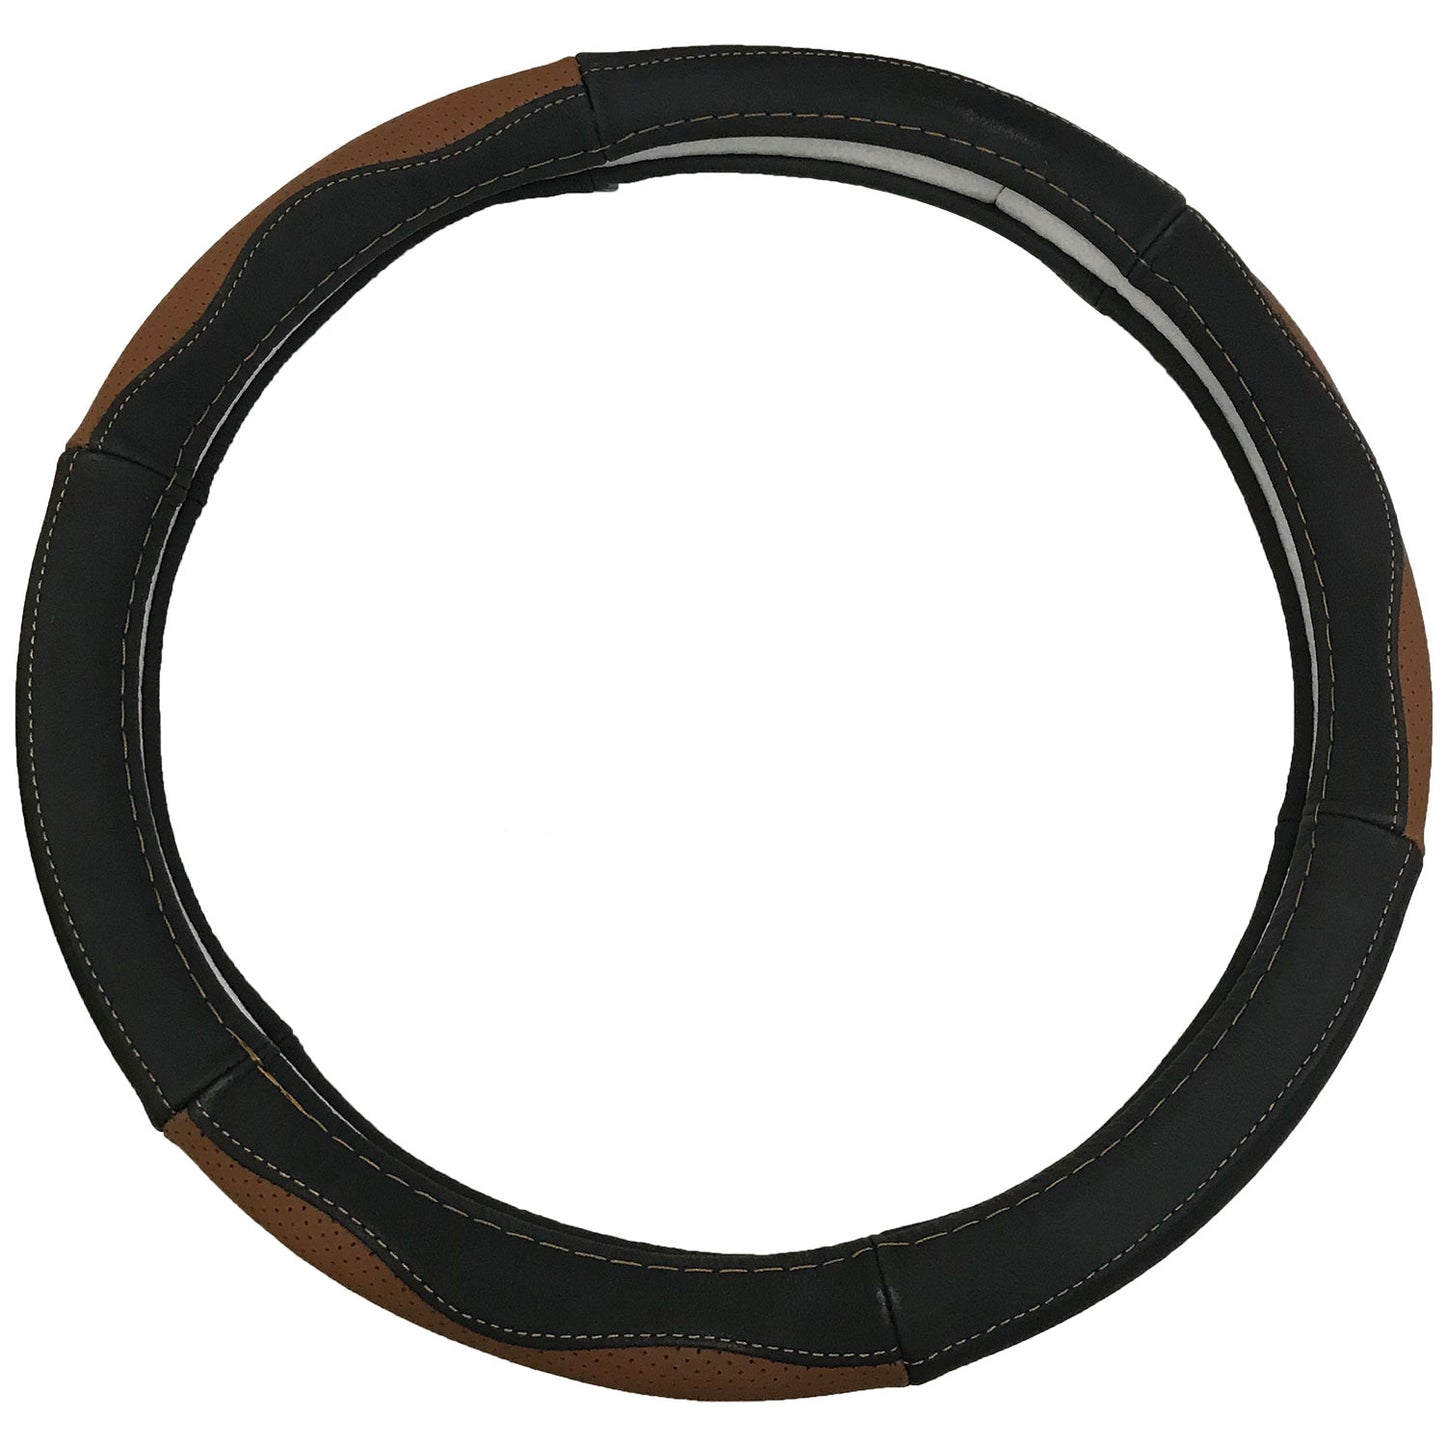 Oshotto SC-002 Leather Car Steering Cover (Black and Tan,Medium)